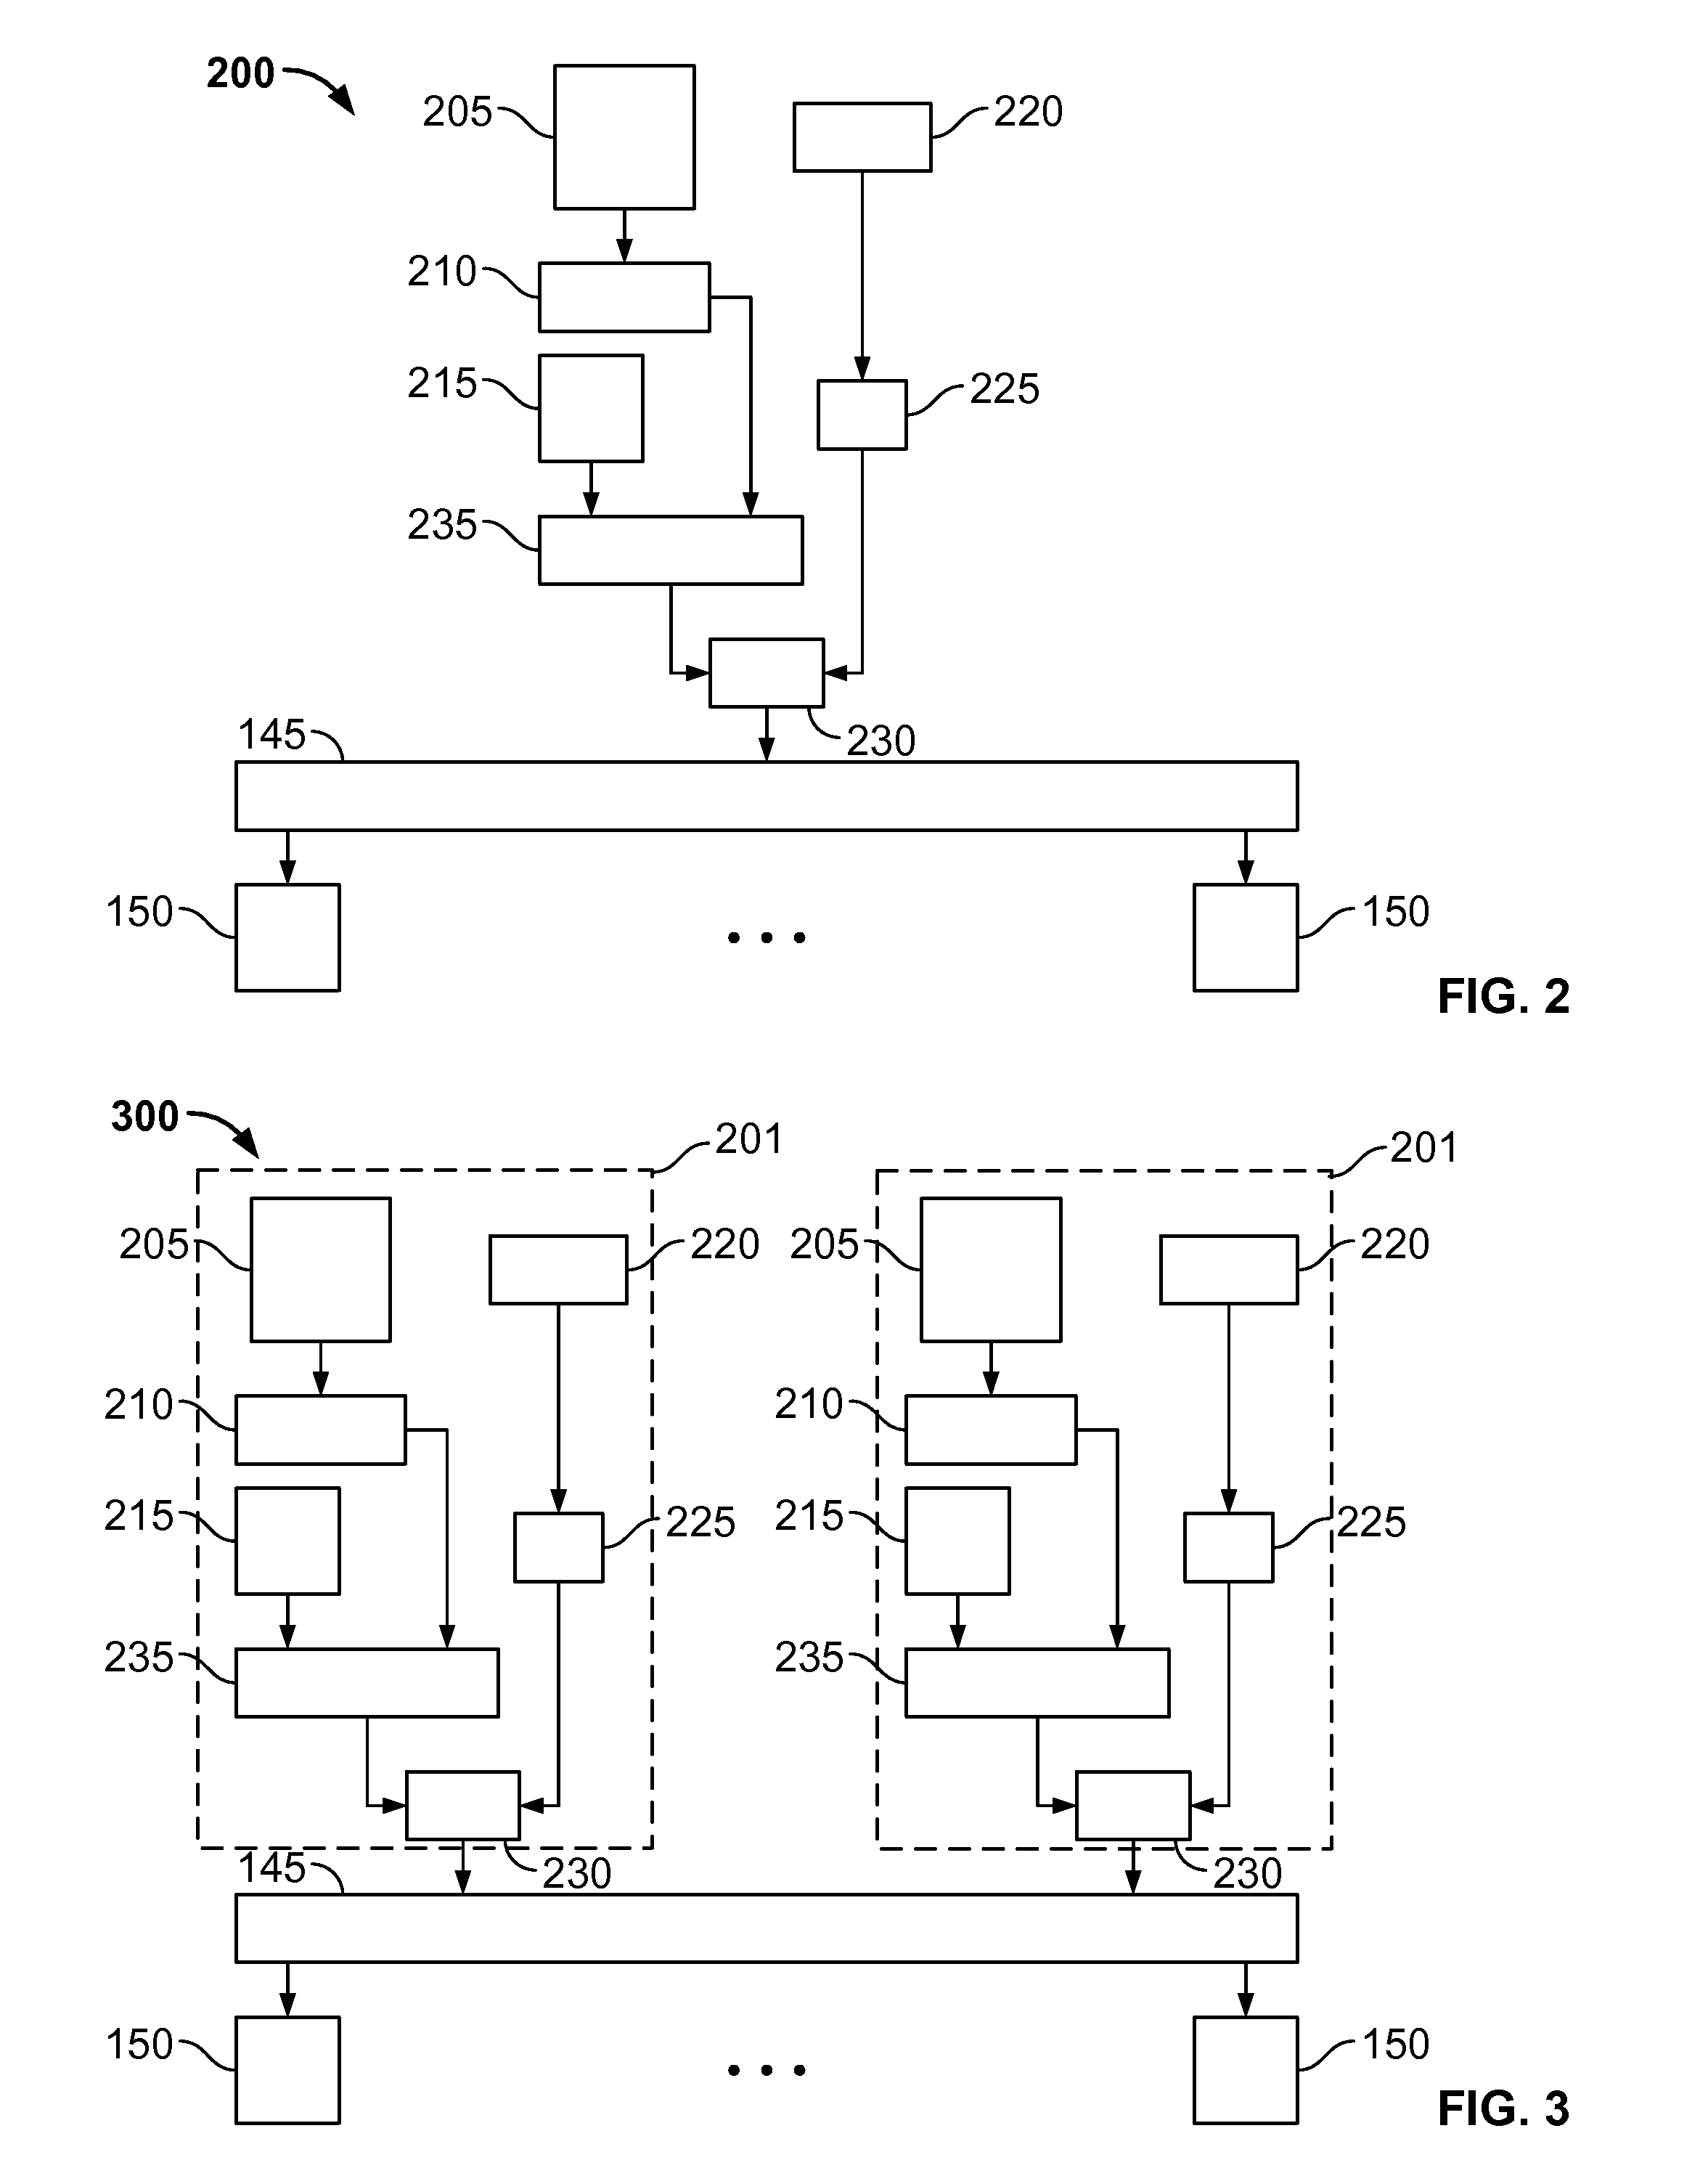 Managing Electrical Power for a Nuclear Reactor System